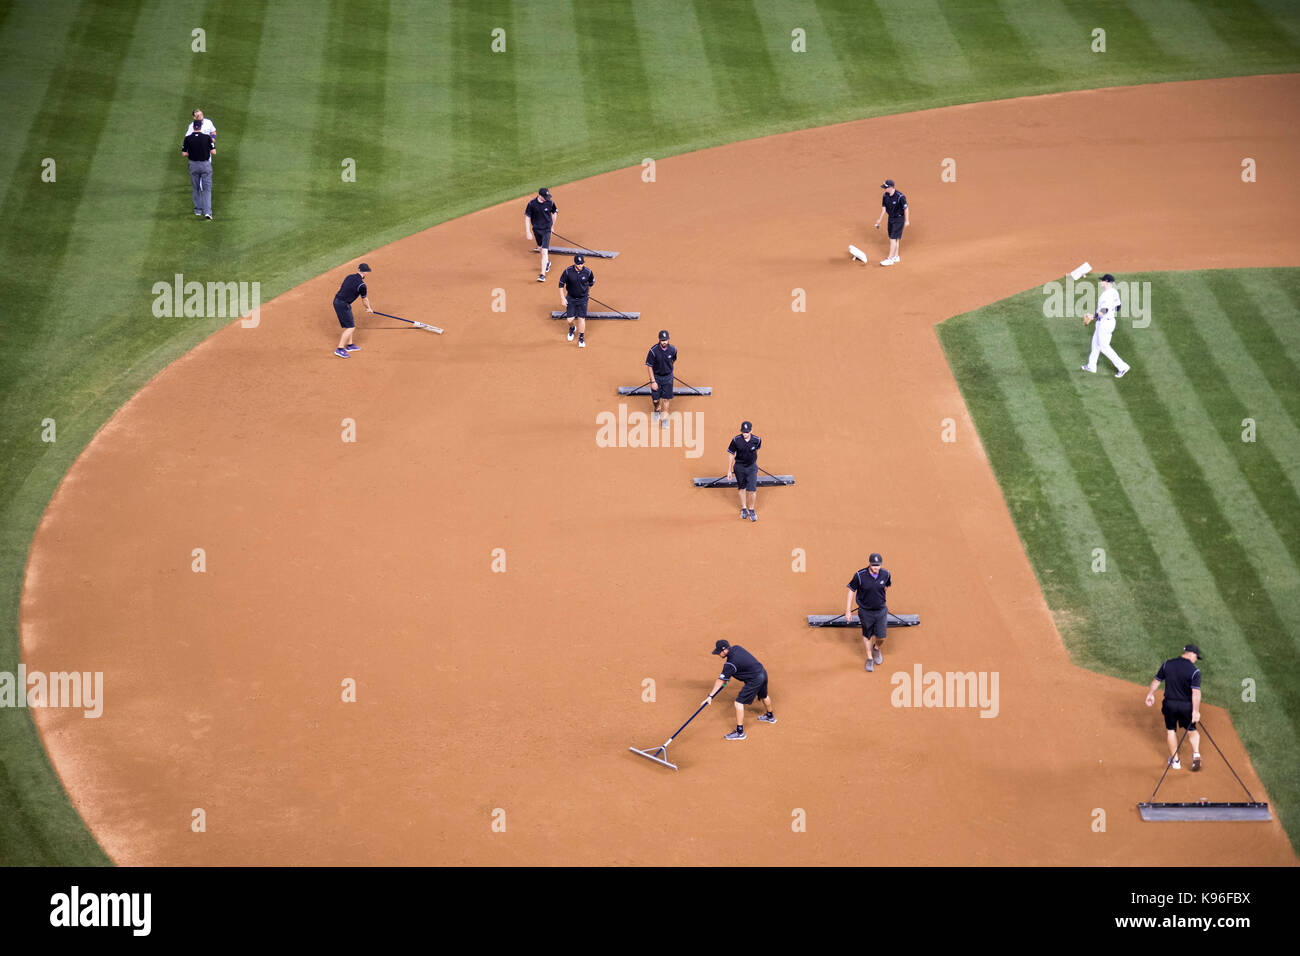 Denver, Colorado - The grounds crew grooms the infield between innings of a baseball game at Coors Field. Stock Photo